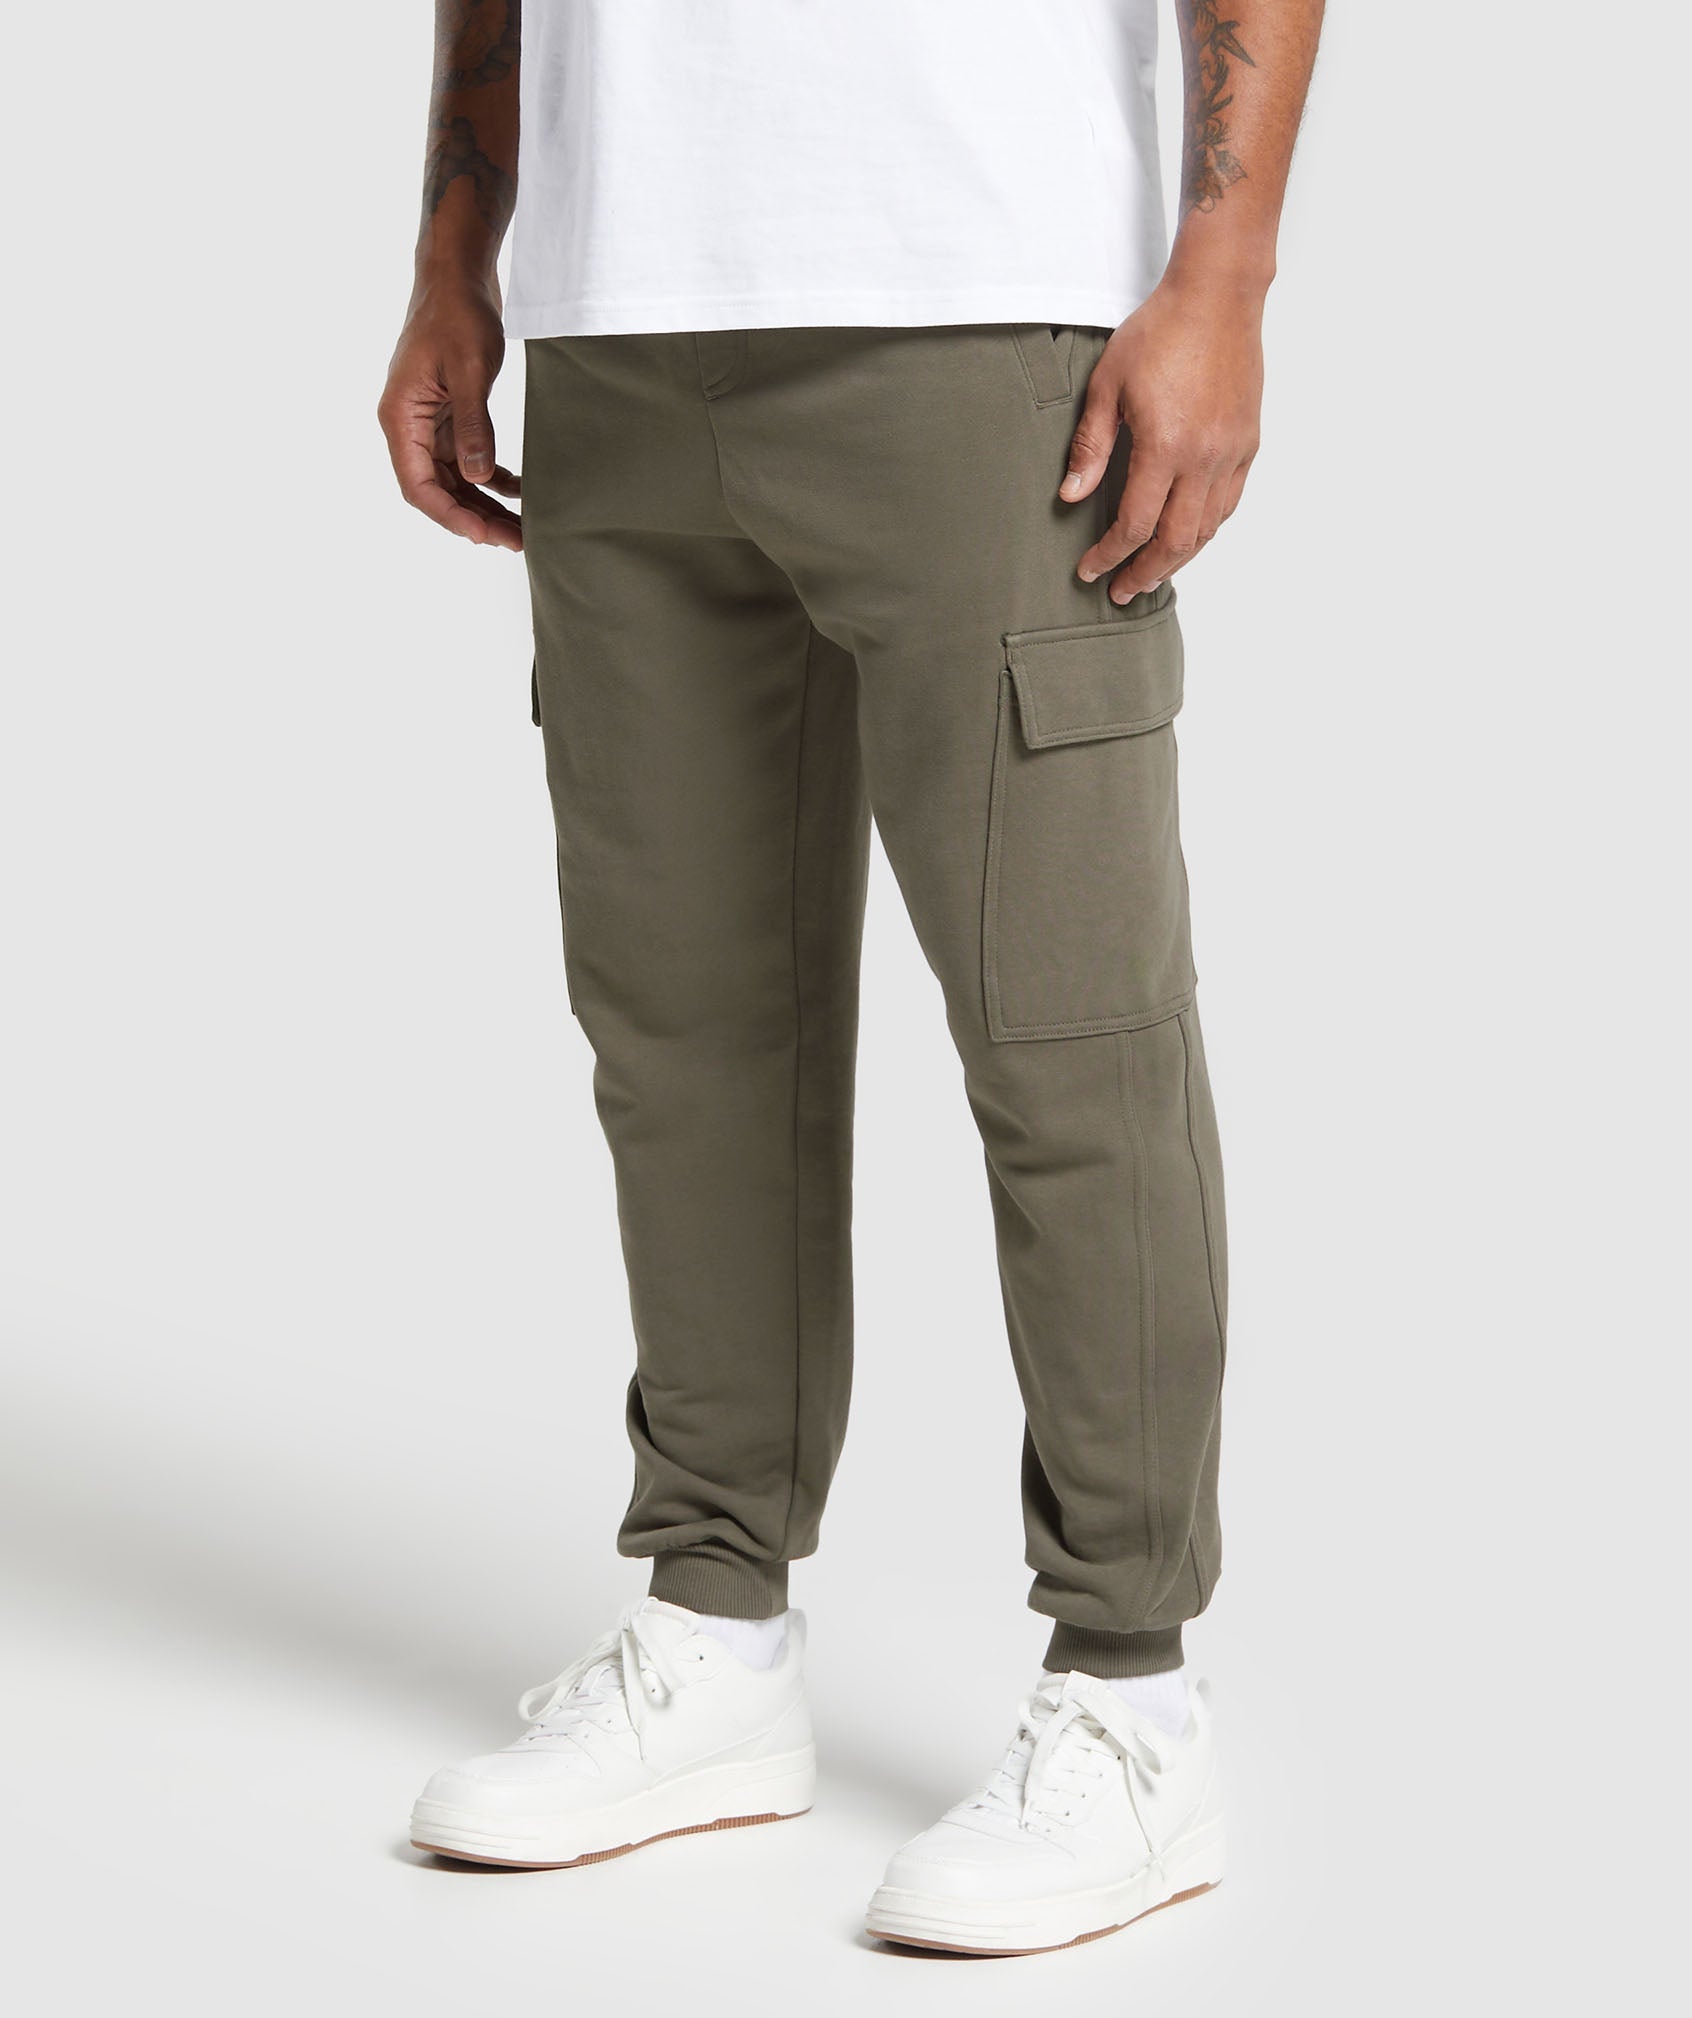 Rest Day Essentials Cargo Joggers in Camo Brown - view 3